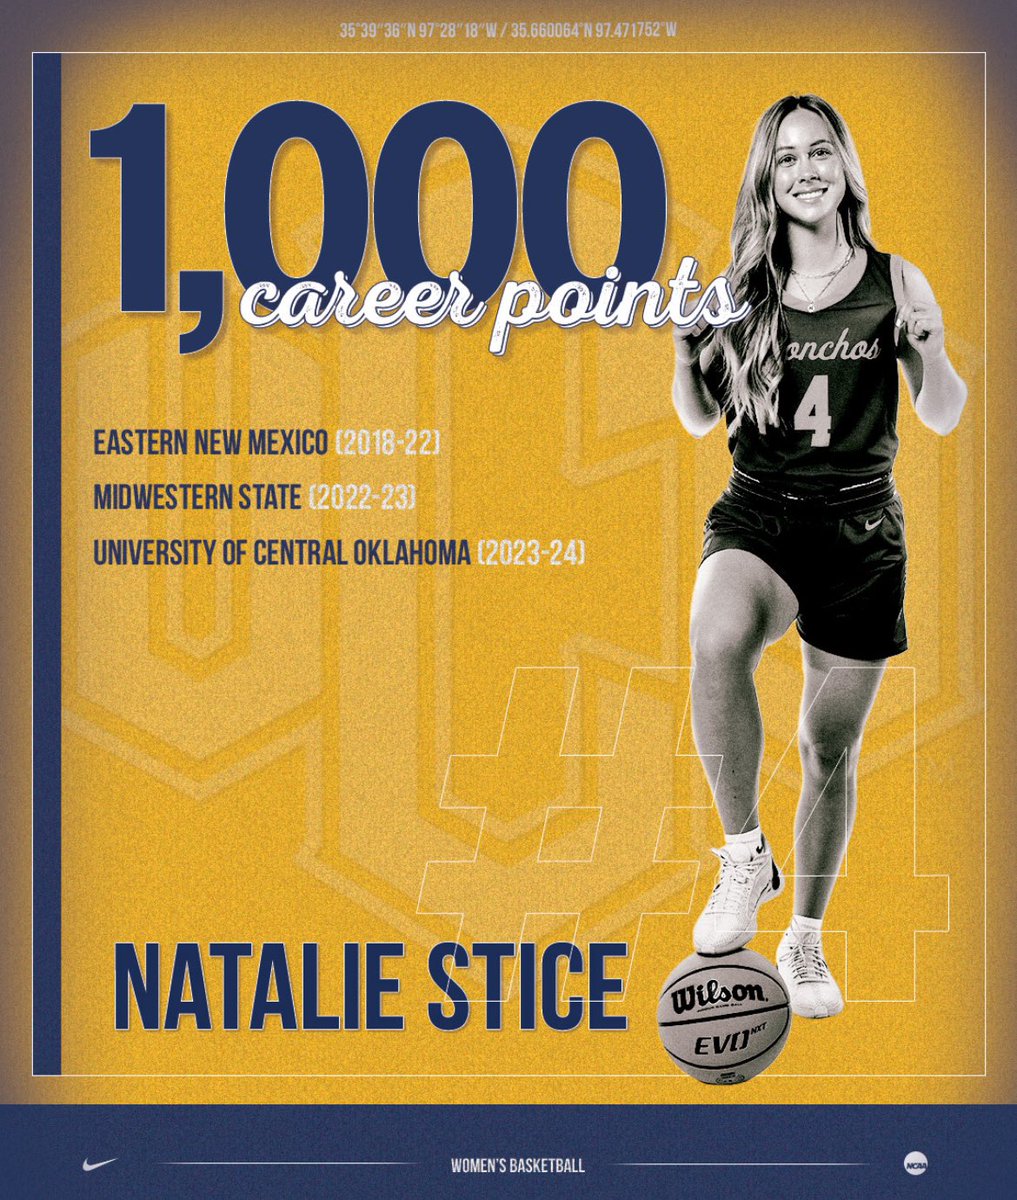 With her layup in the second quarter, Central Oklahoma guard Natalie Stice has now scored 1,000 points in her collegiate hoops career!!! @UCOWBB x #RollChos